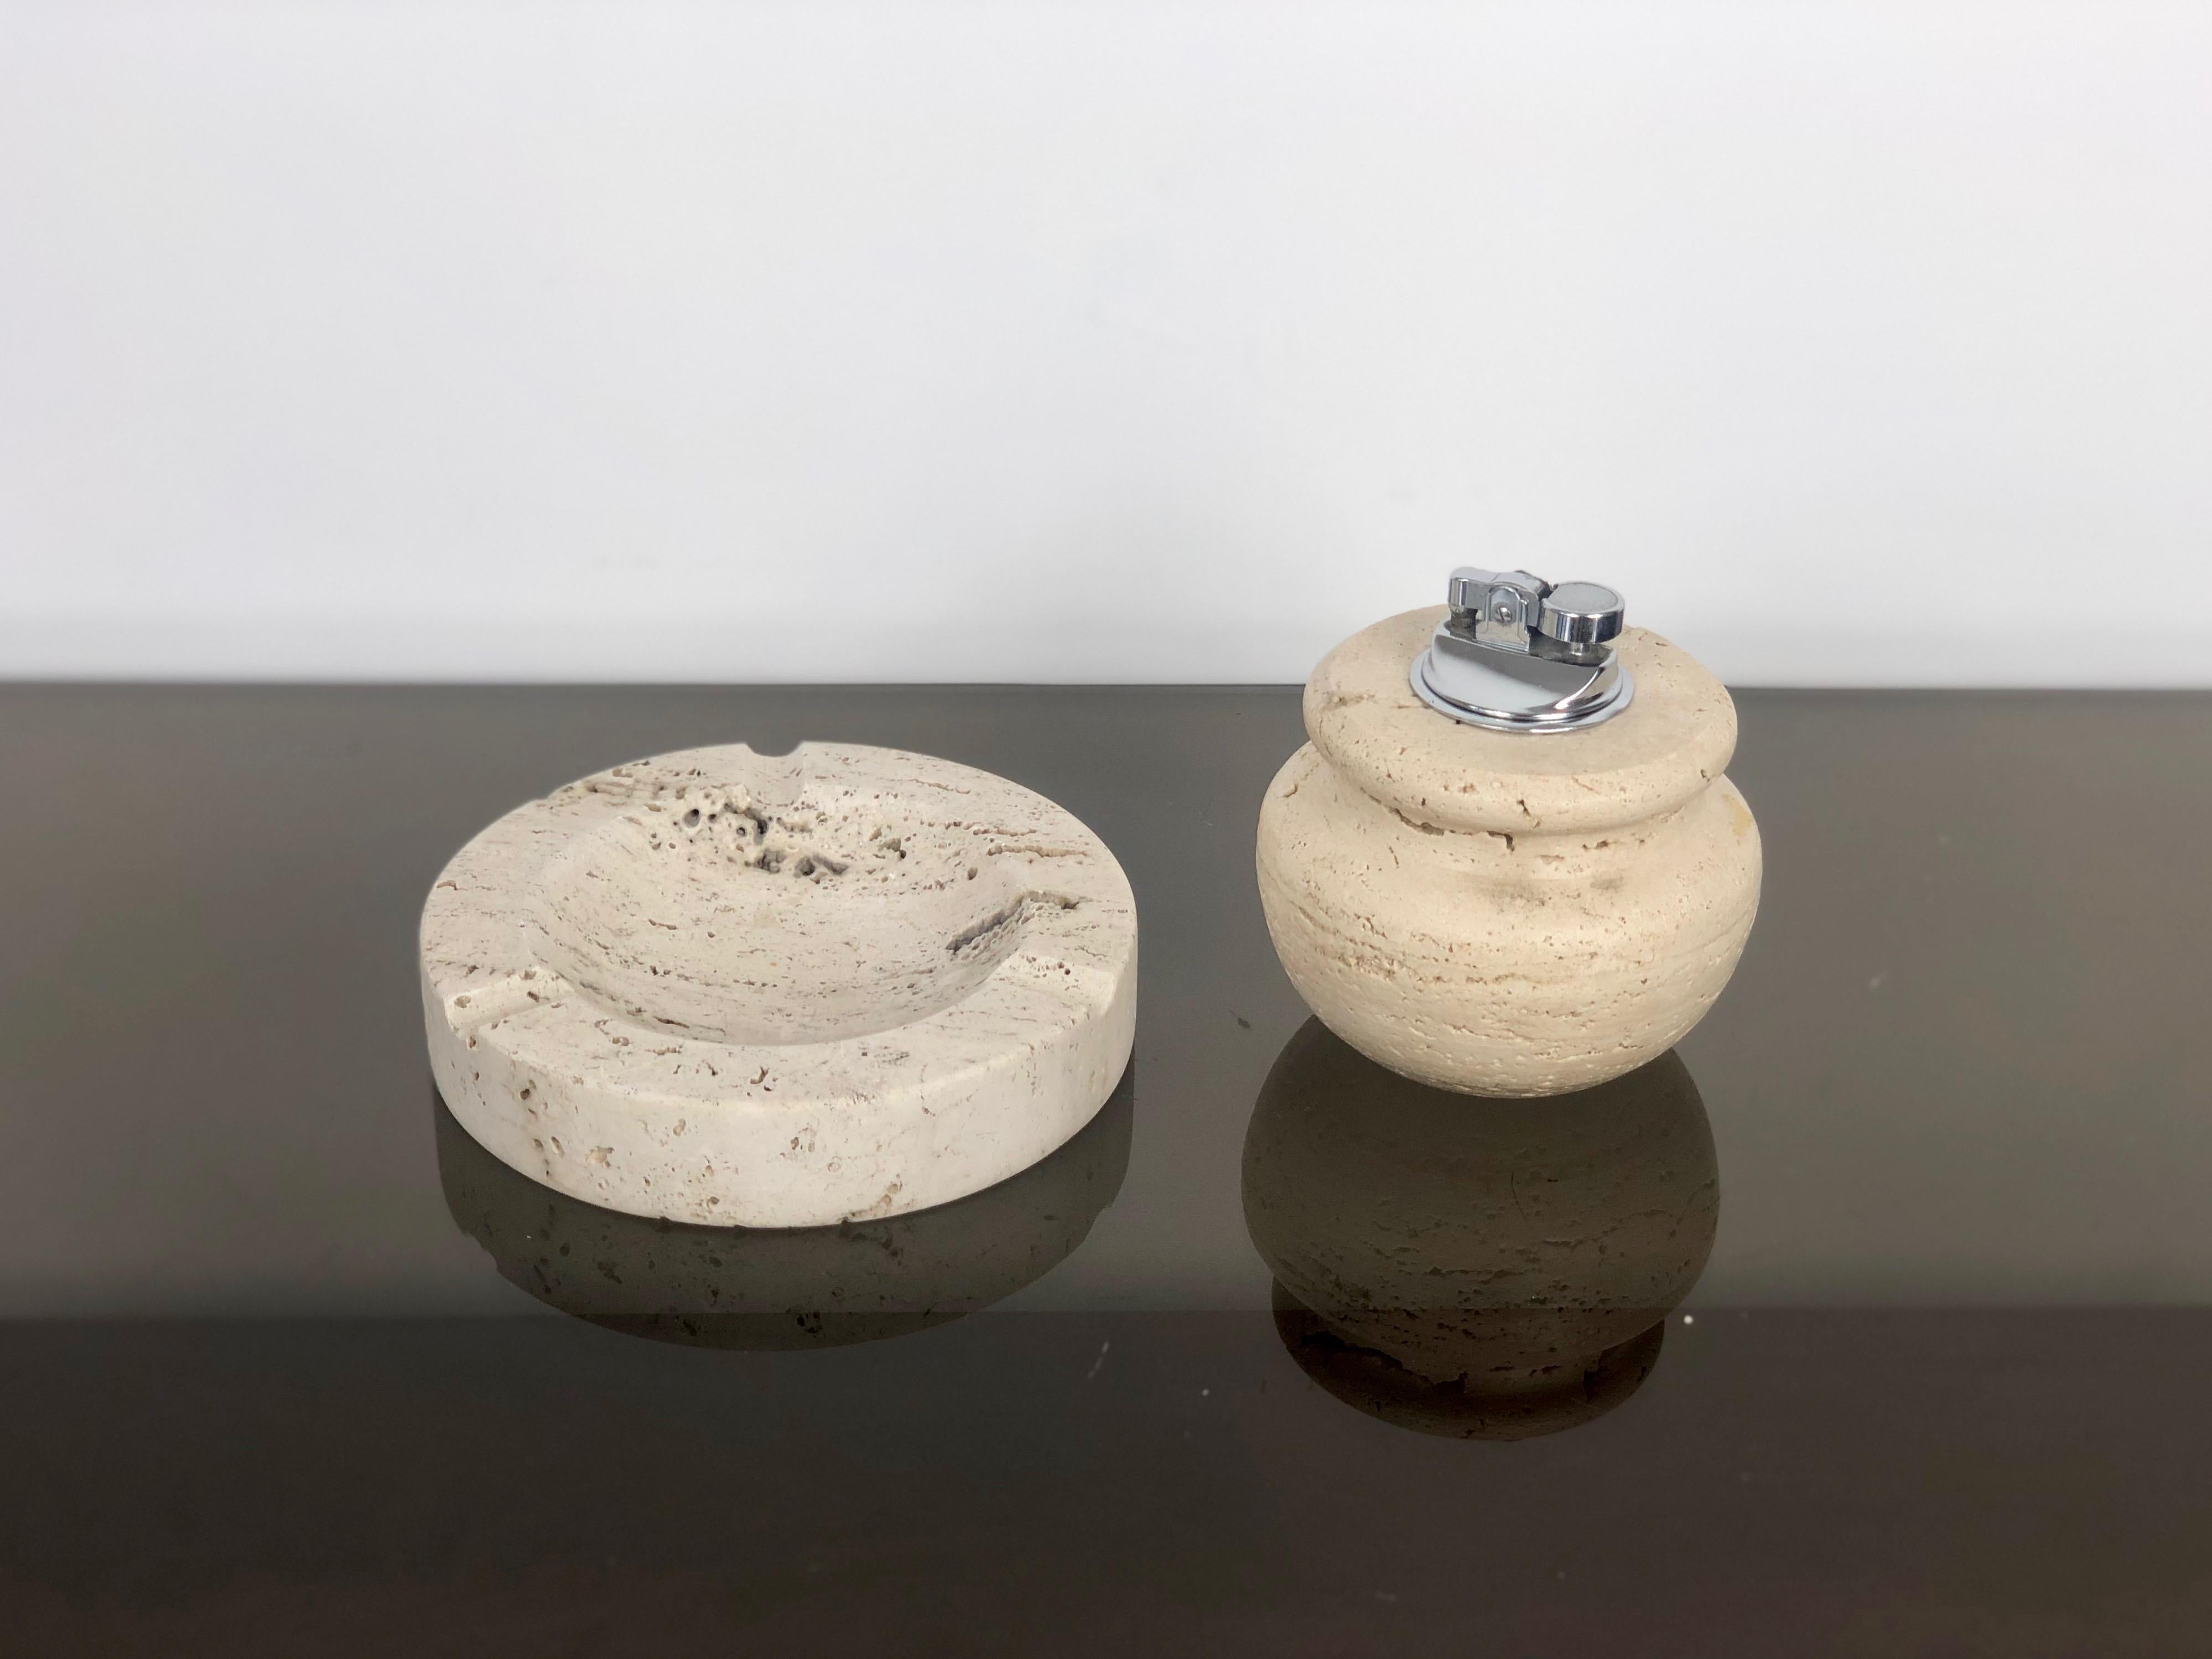 Table set of ashtray and lighter in travertine marble, attributed to the Italian designers Fratelli Manelli - Italy, 1970s. 

Dimensions: 
Ashtray: 3 x 15 cm. 
Lighter: 10 x 10 cm.